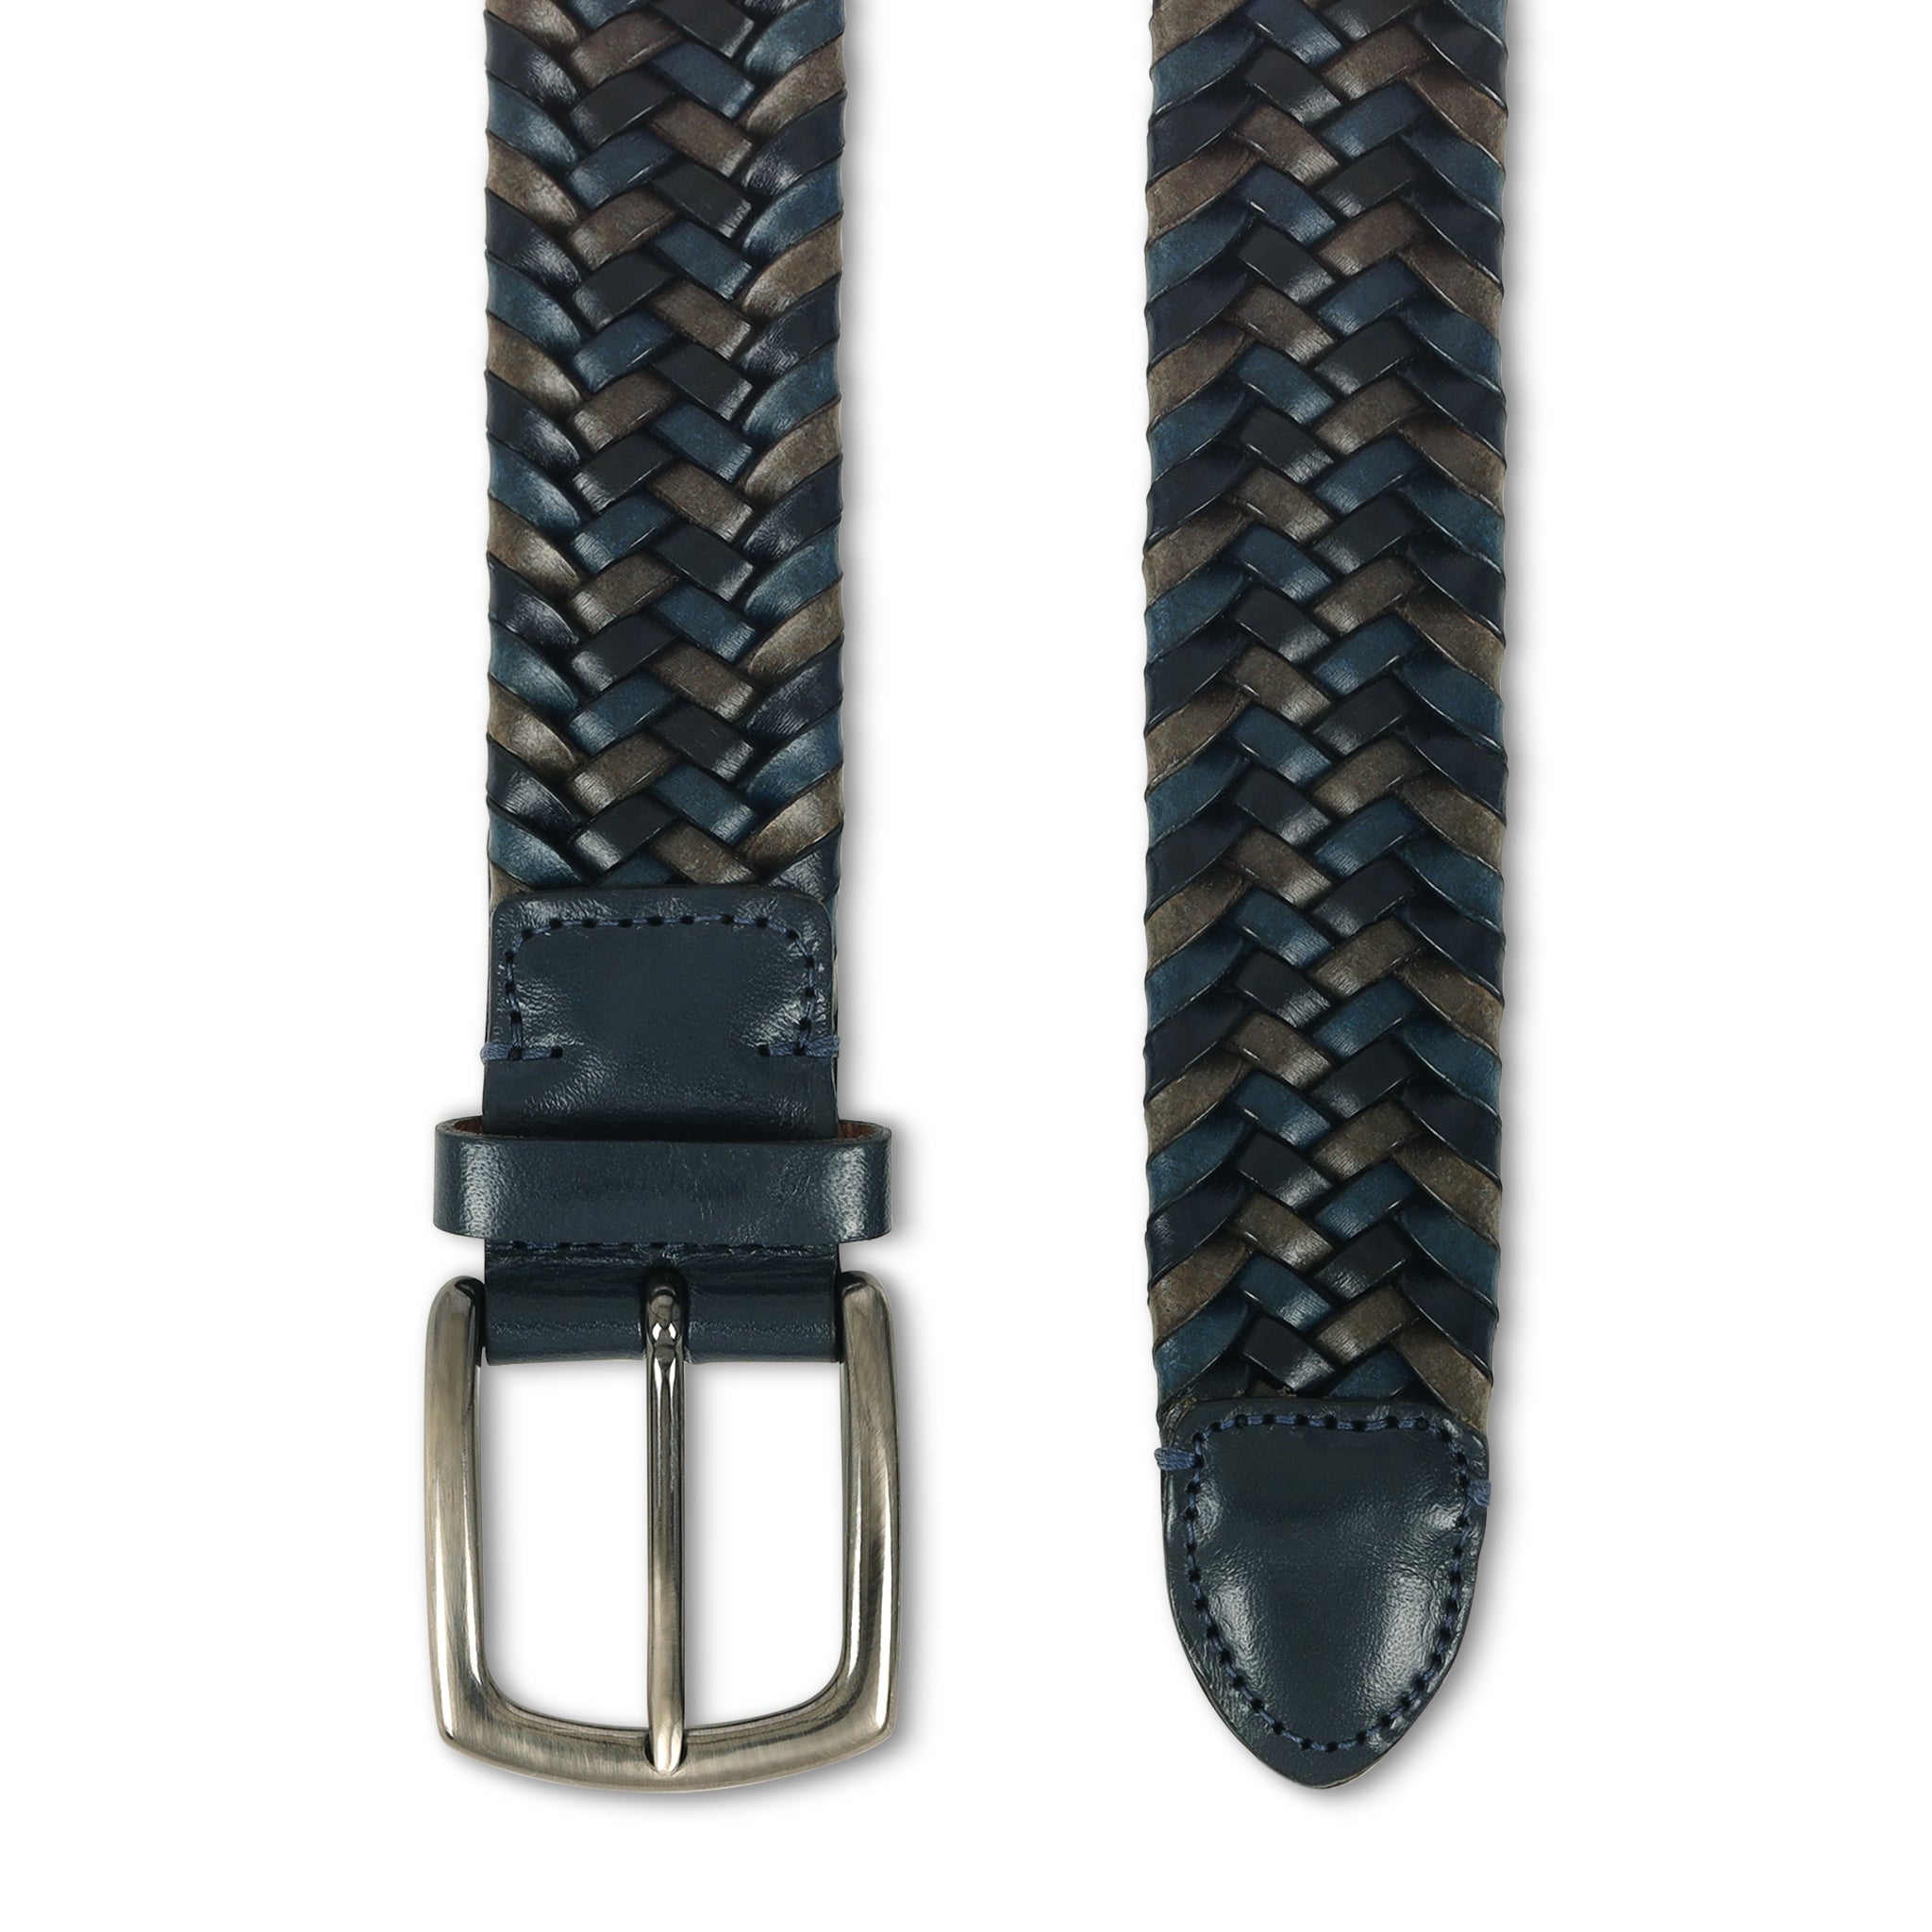 Black and Blue Braided Leather Belt